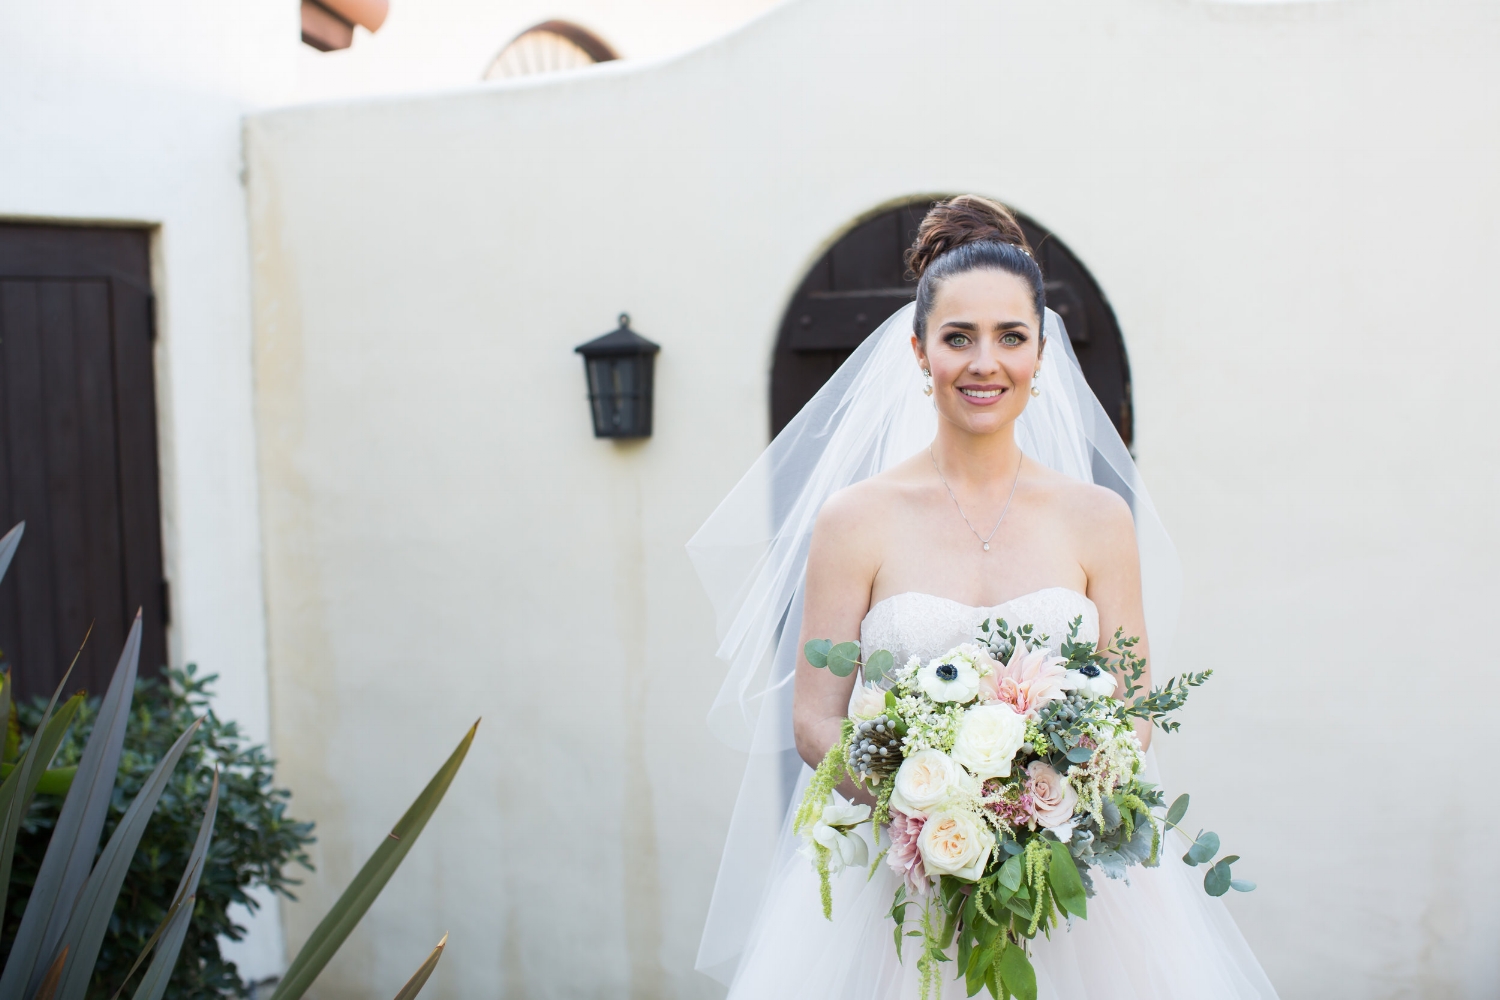 Brunette Bride with Braid Updo and Bouquet. Wedding Hair and Makeup by Vanity Belle in Orange County (Costa Mesa) and San Diego (La Jolla) 